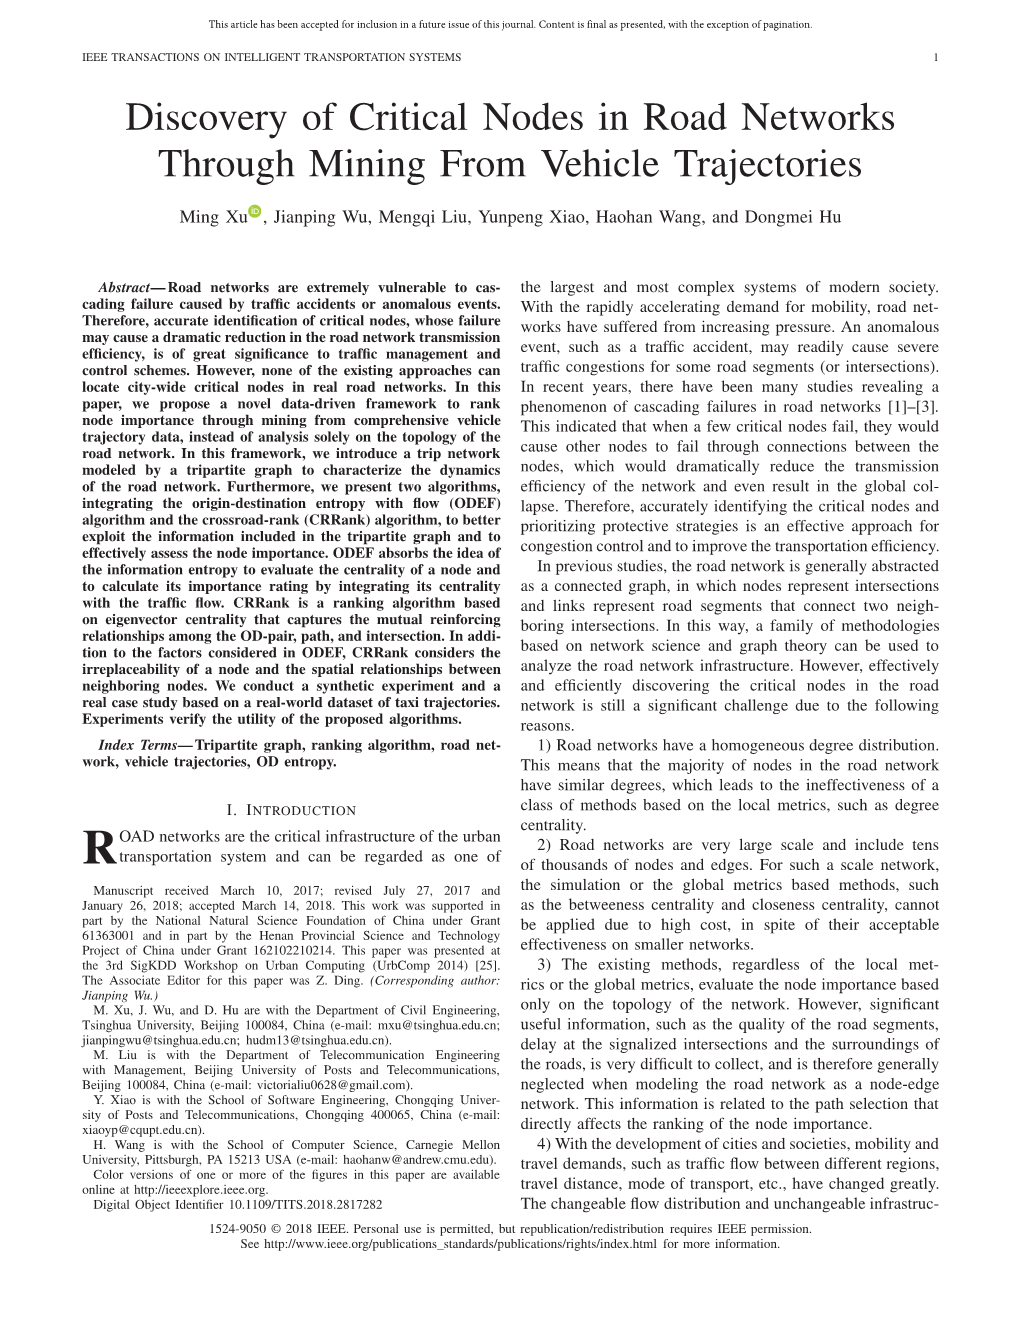 Discovery of Critical Nodes in Road Networks Through Mining from Vehicle Trajectories